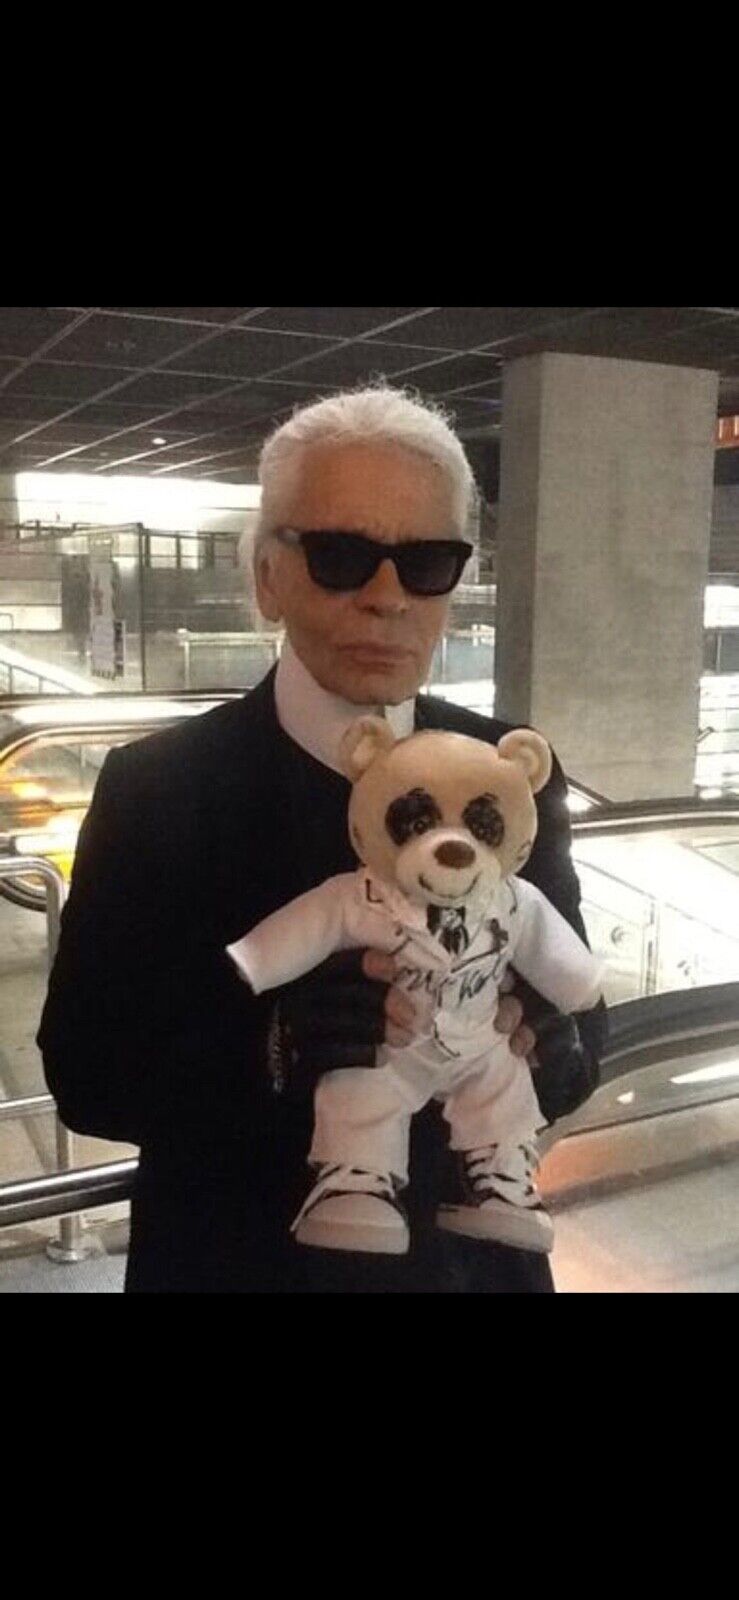 One of a kind Karl Lagerfeld designed and signed bear * museum quality*